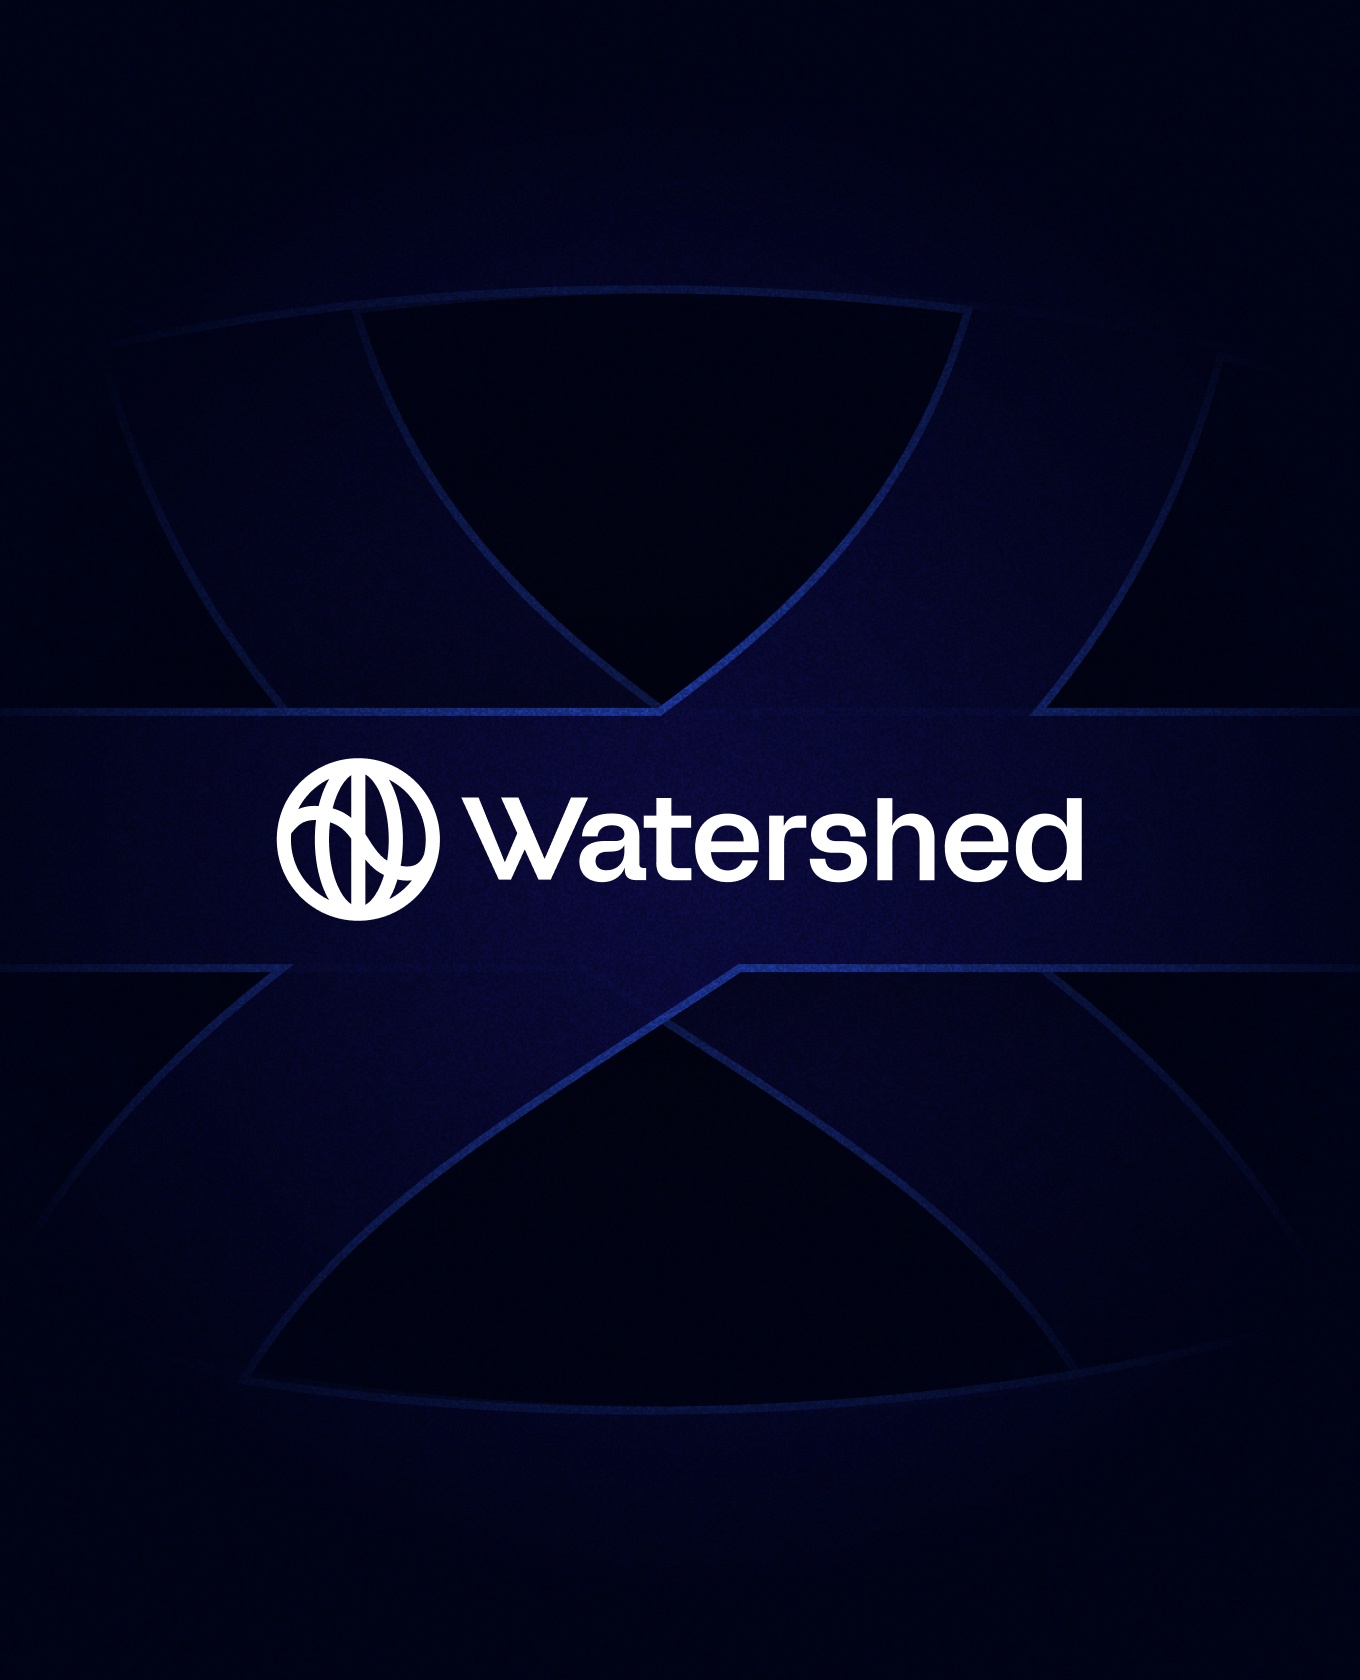 The Watershed wordmark against a dark but vibrant blue background composed of abstract and expanded shapes from the wordmark.